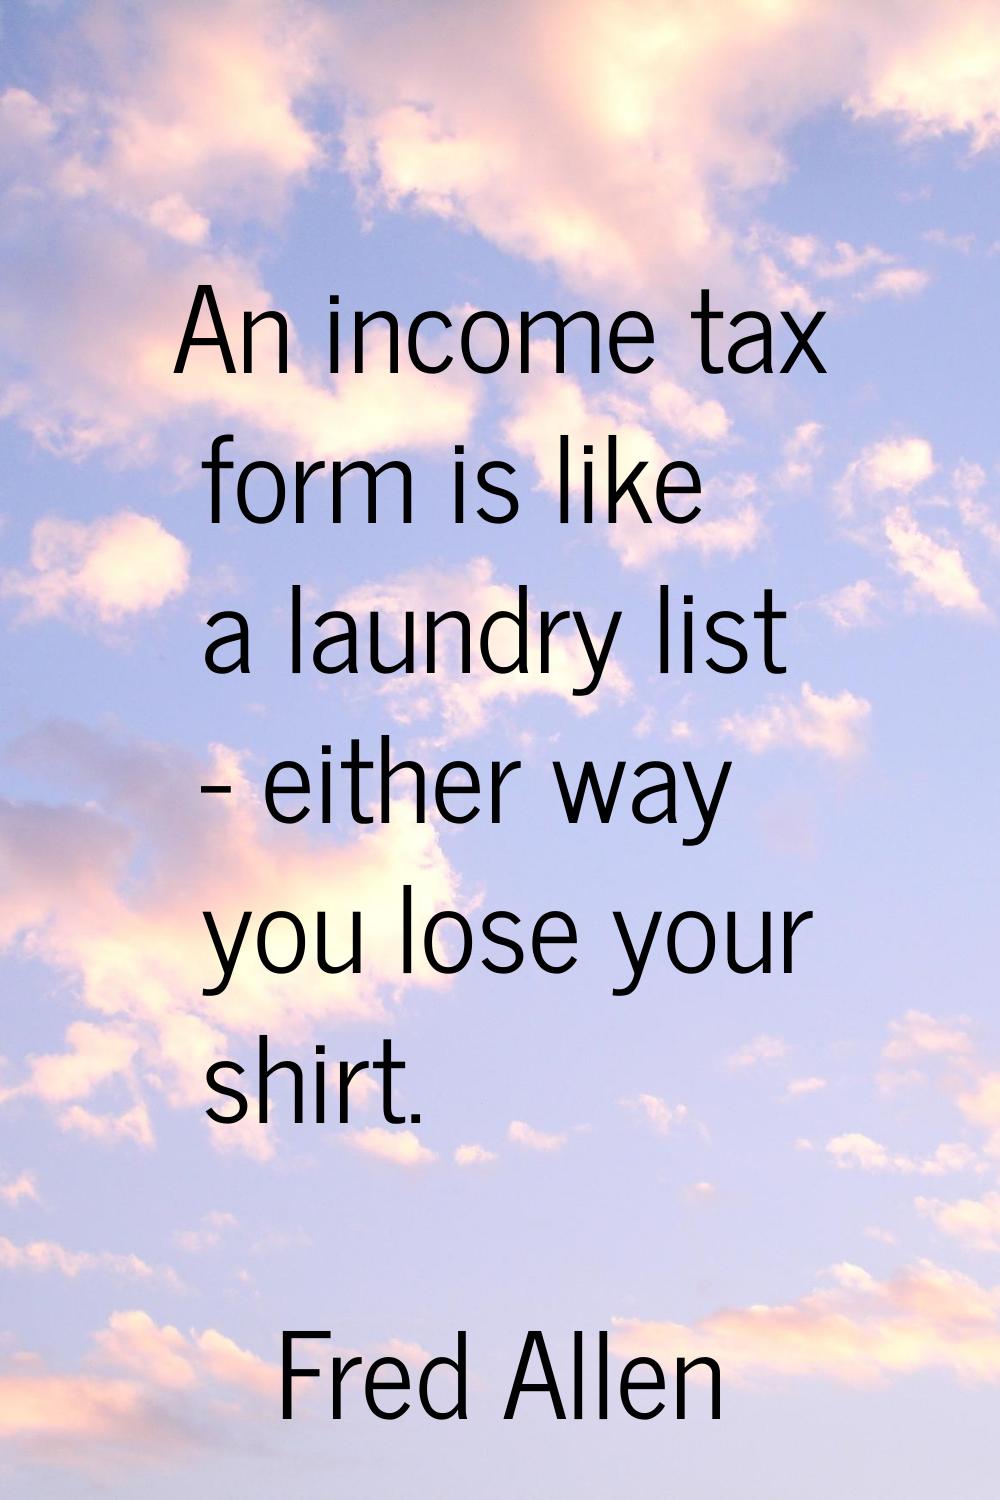 An income tax form is like a laundry list - either way you lose your shirt.